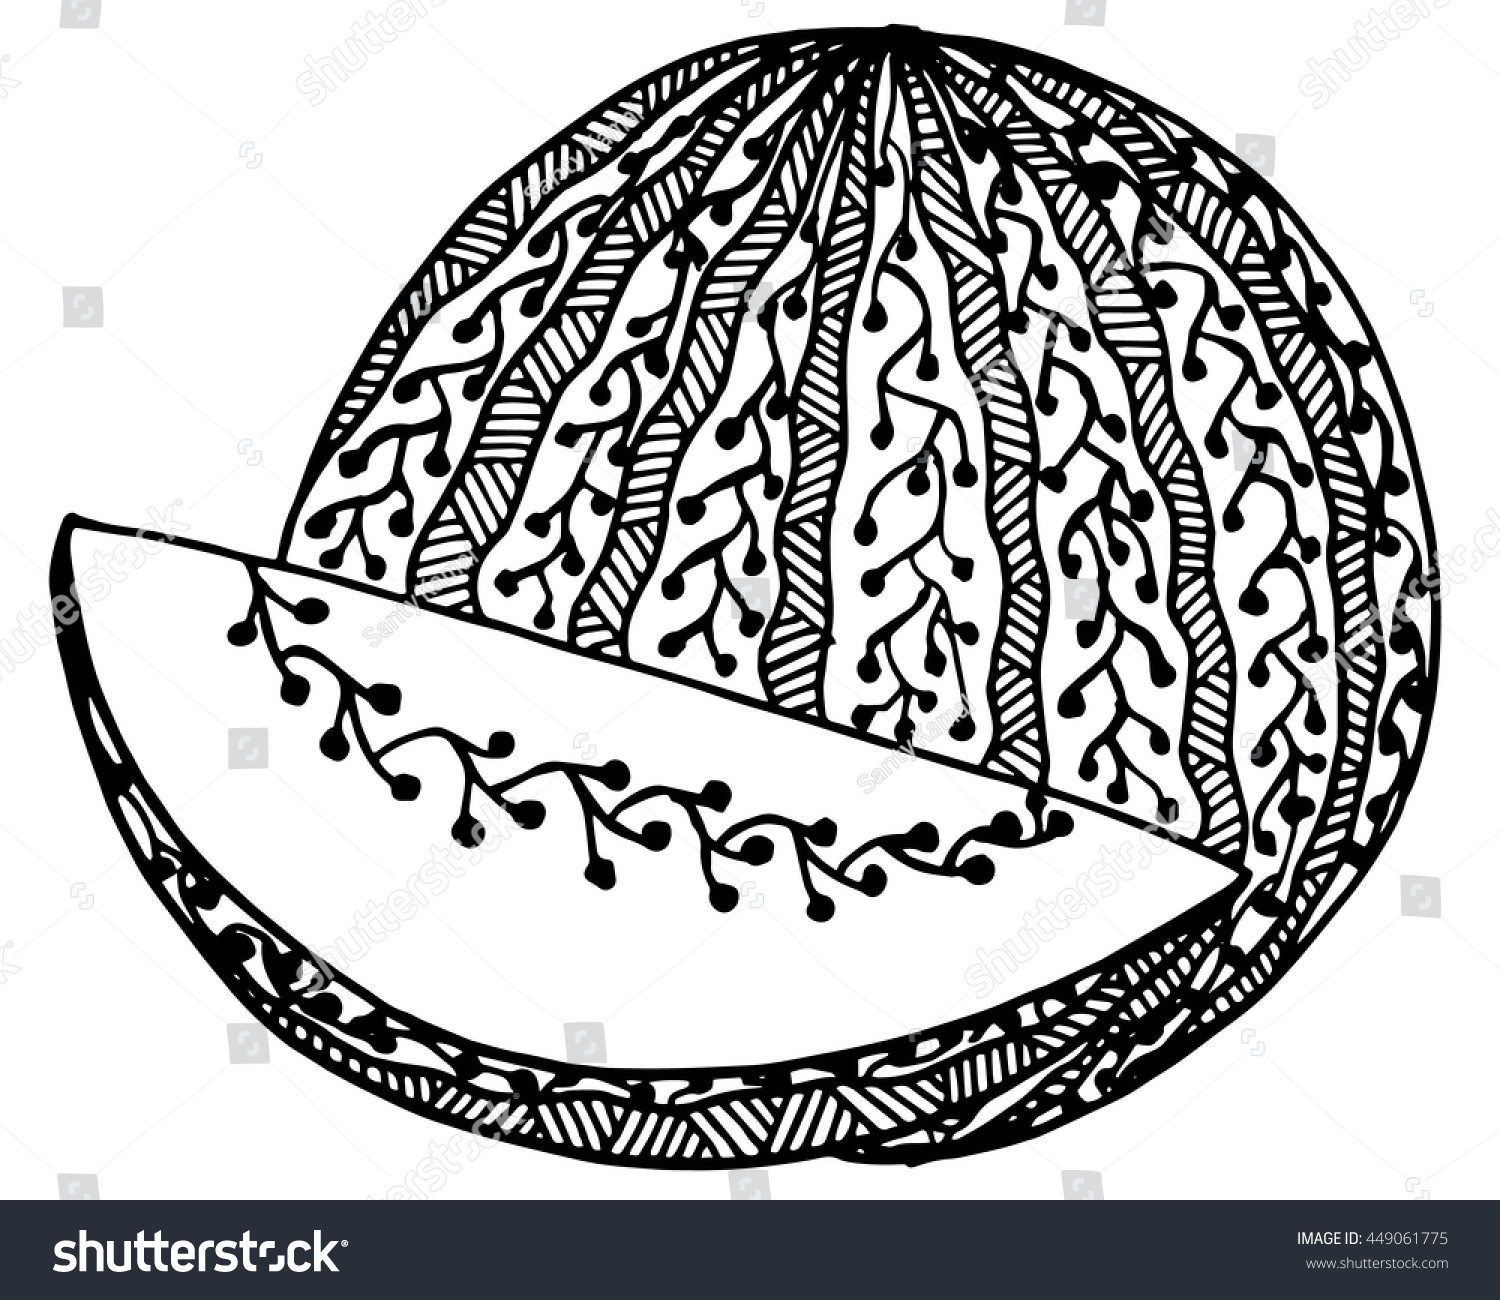 Coloring pages watermelon large watermelon piece for children and adults The pages of the